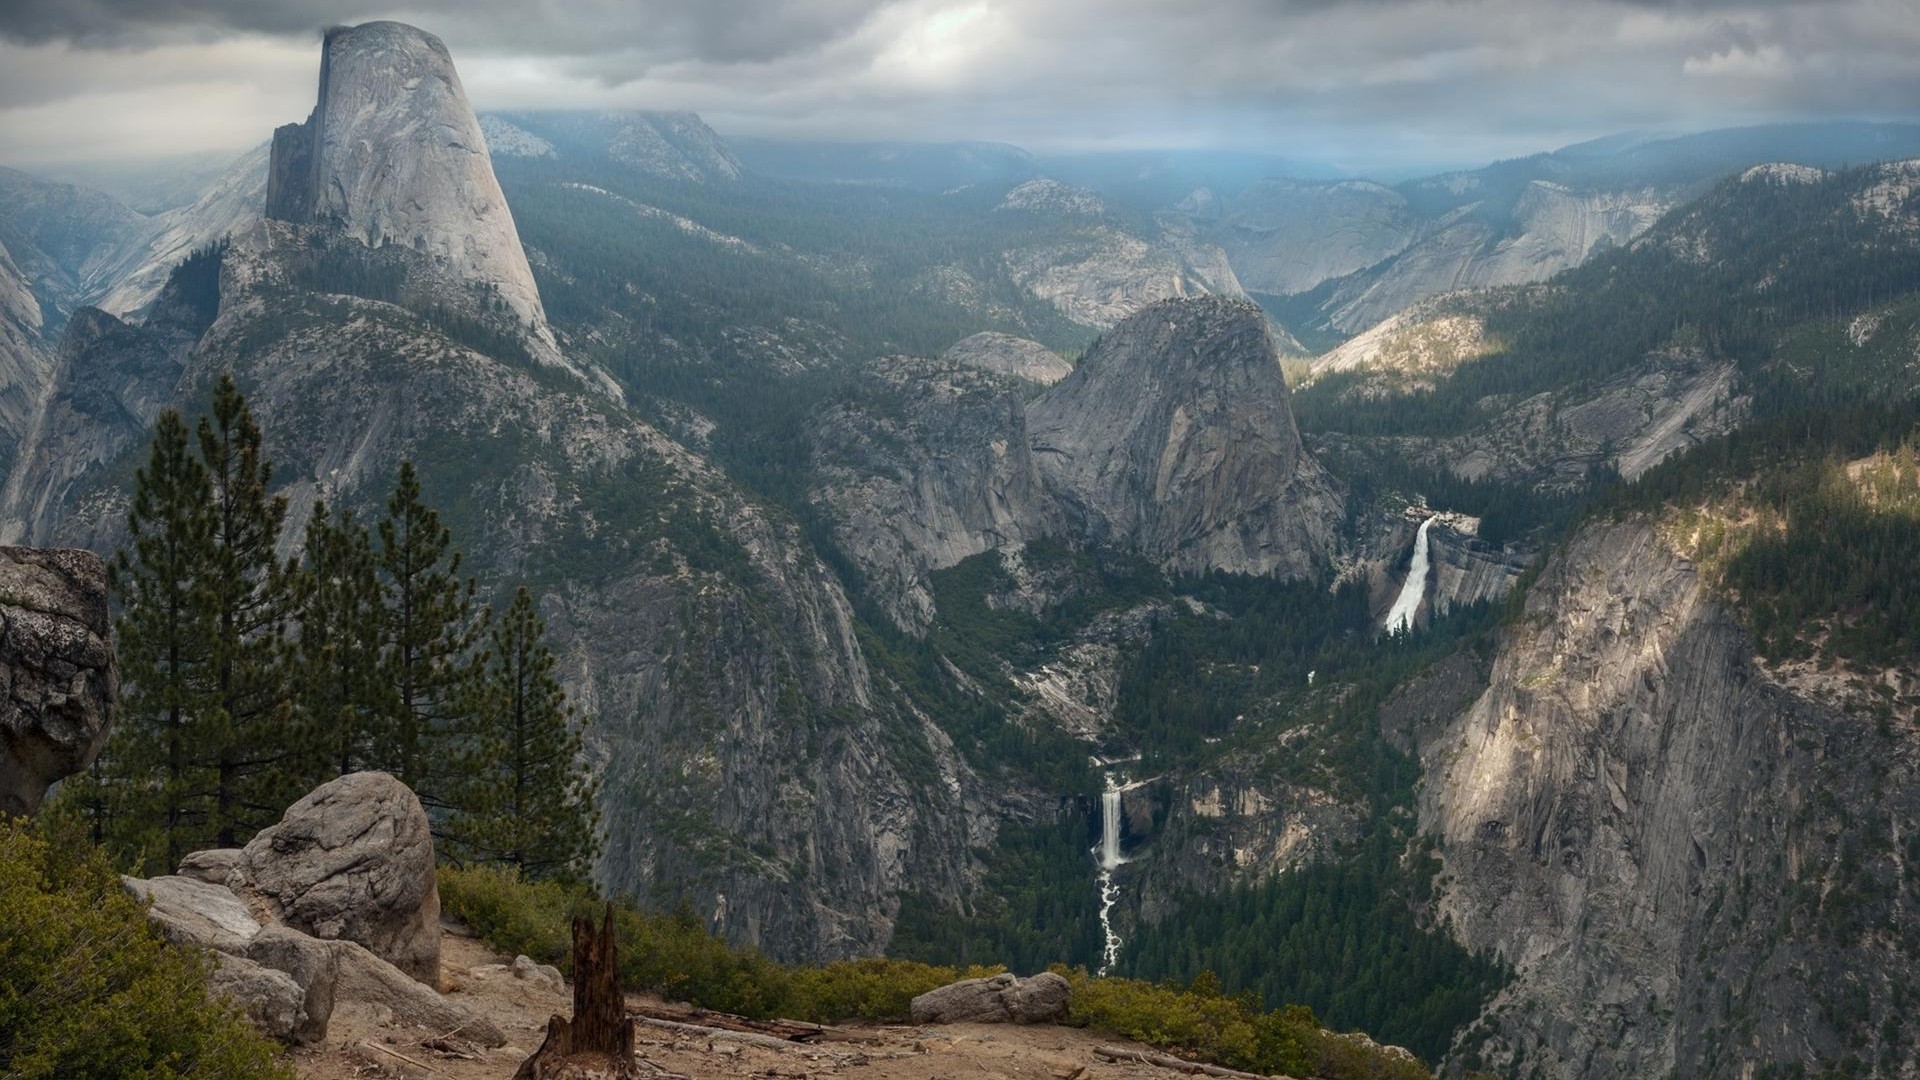 General 1920x1080 nature landscape mountains trees forest USA waterfall Yosemite National Park rocks clouds tree stump Half Dome far view Glacier Point